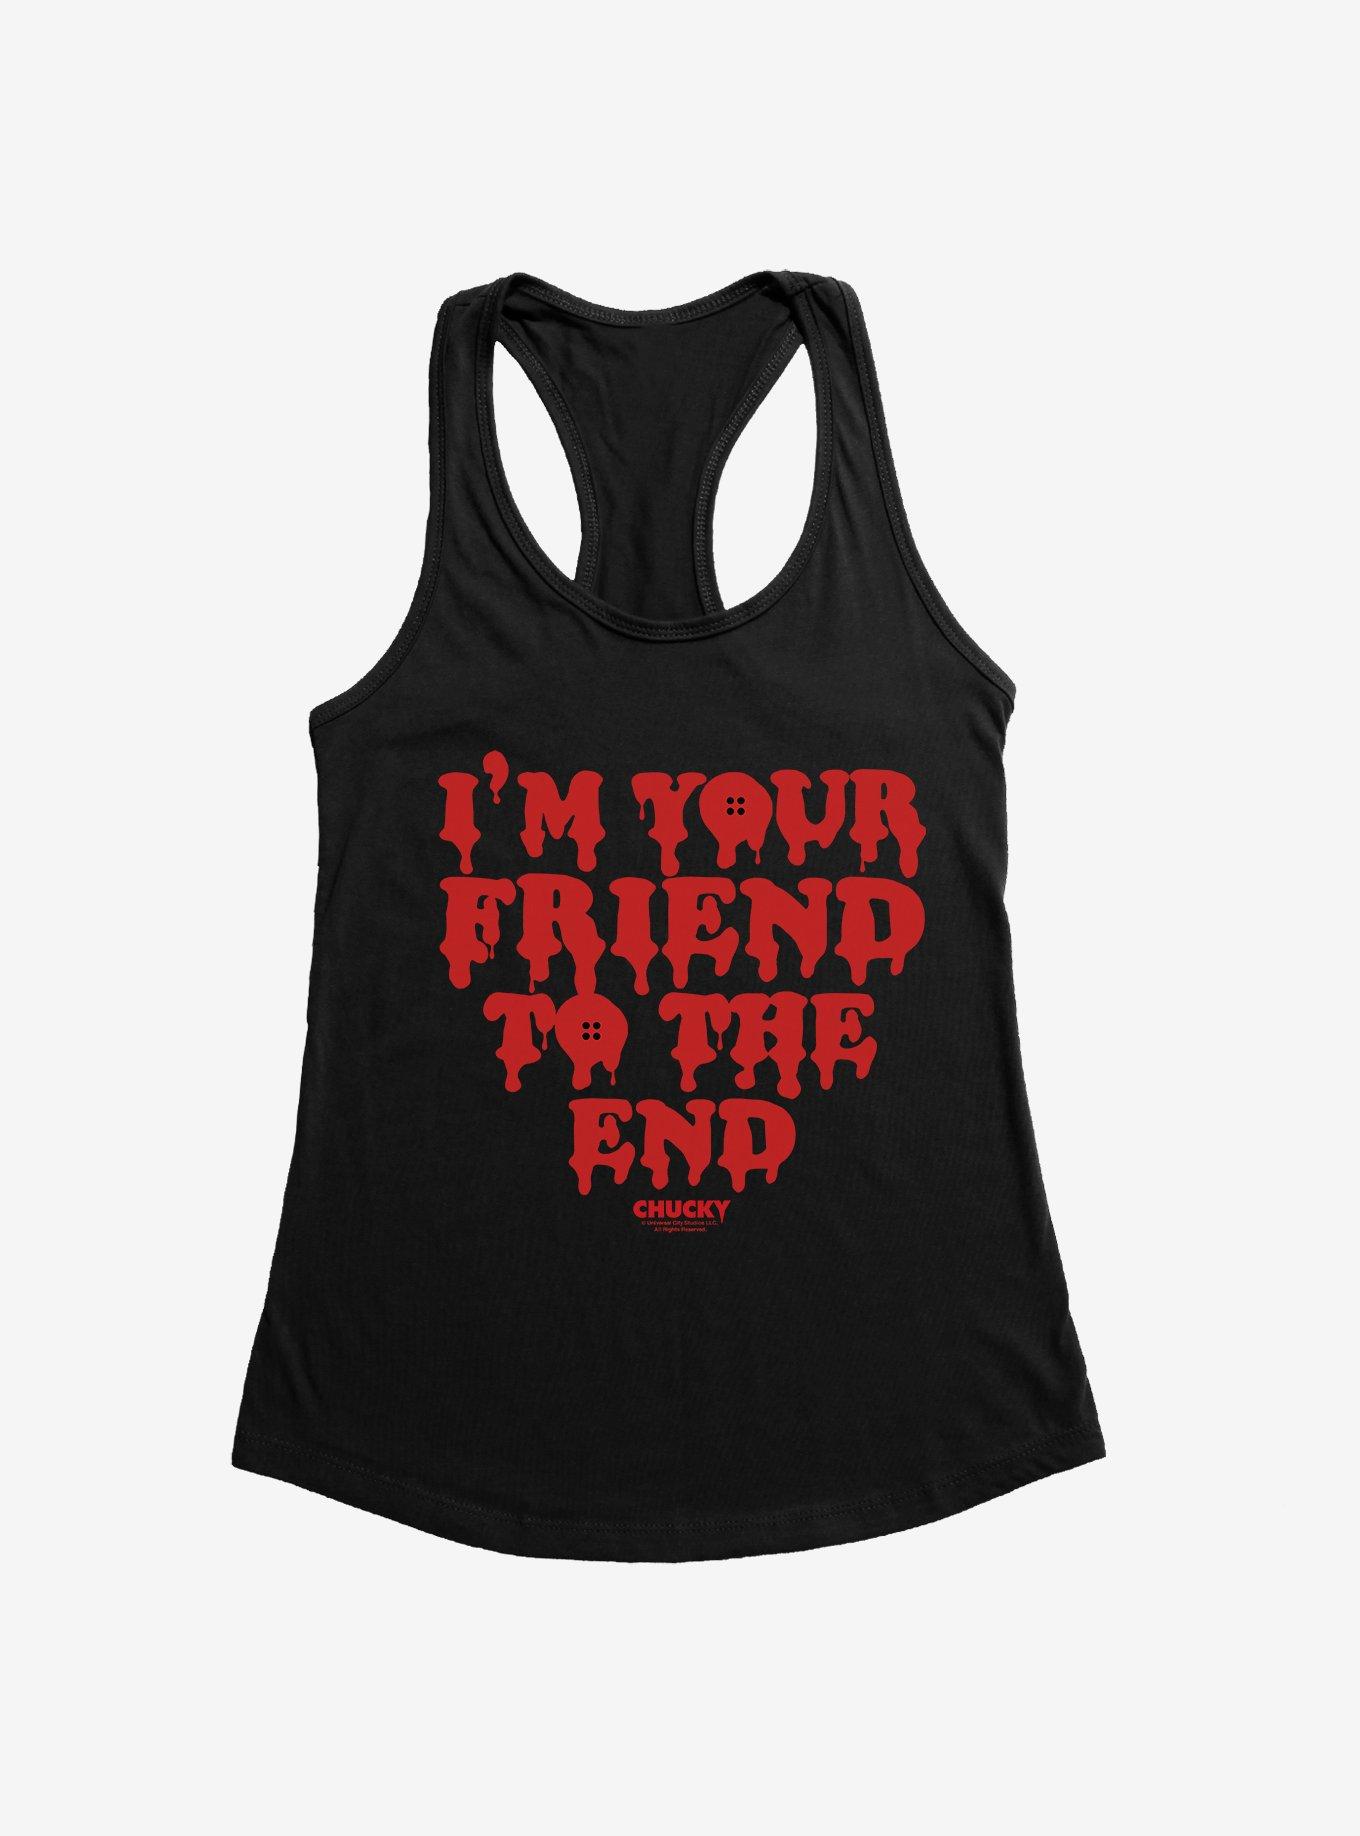 Chucky I'm Your Friend To The End Girls Tank, BLACK, hi-res